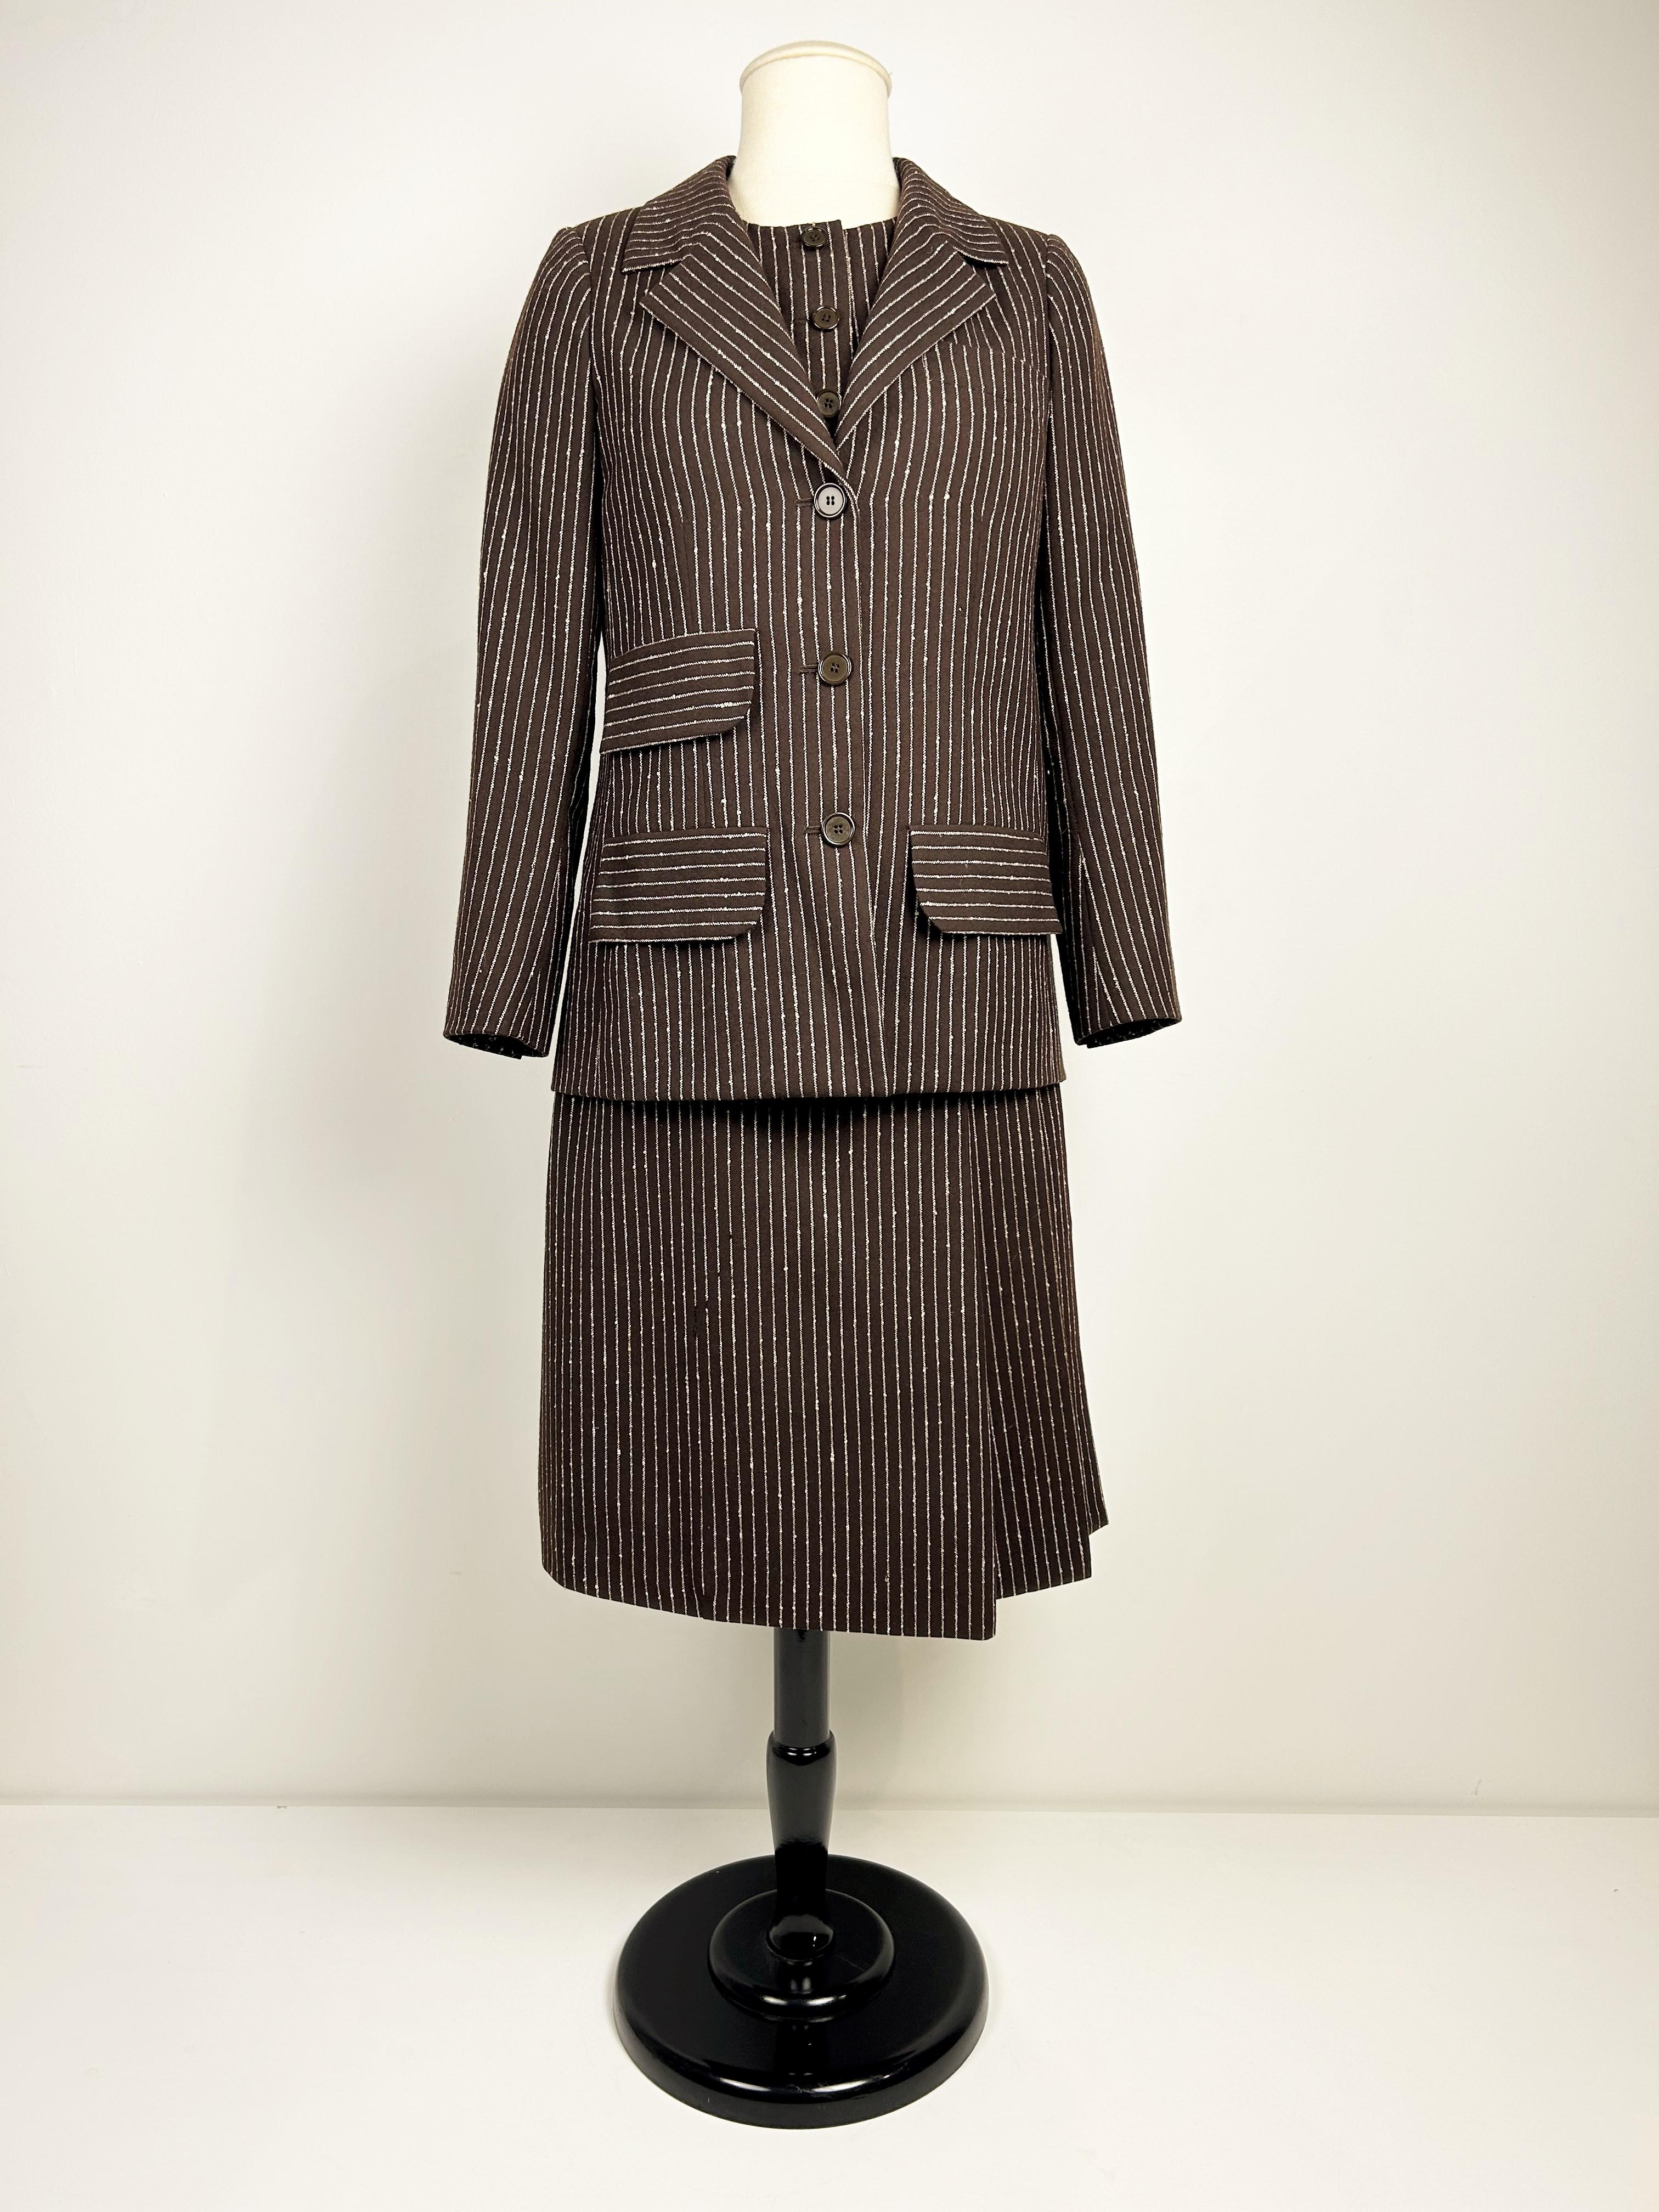 Yves Saint Laurent Haute Couture skirt-suit numbered 14539 Circa 1967/1970 For Sale 8